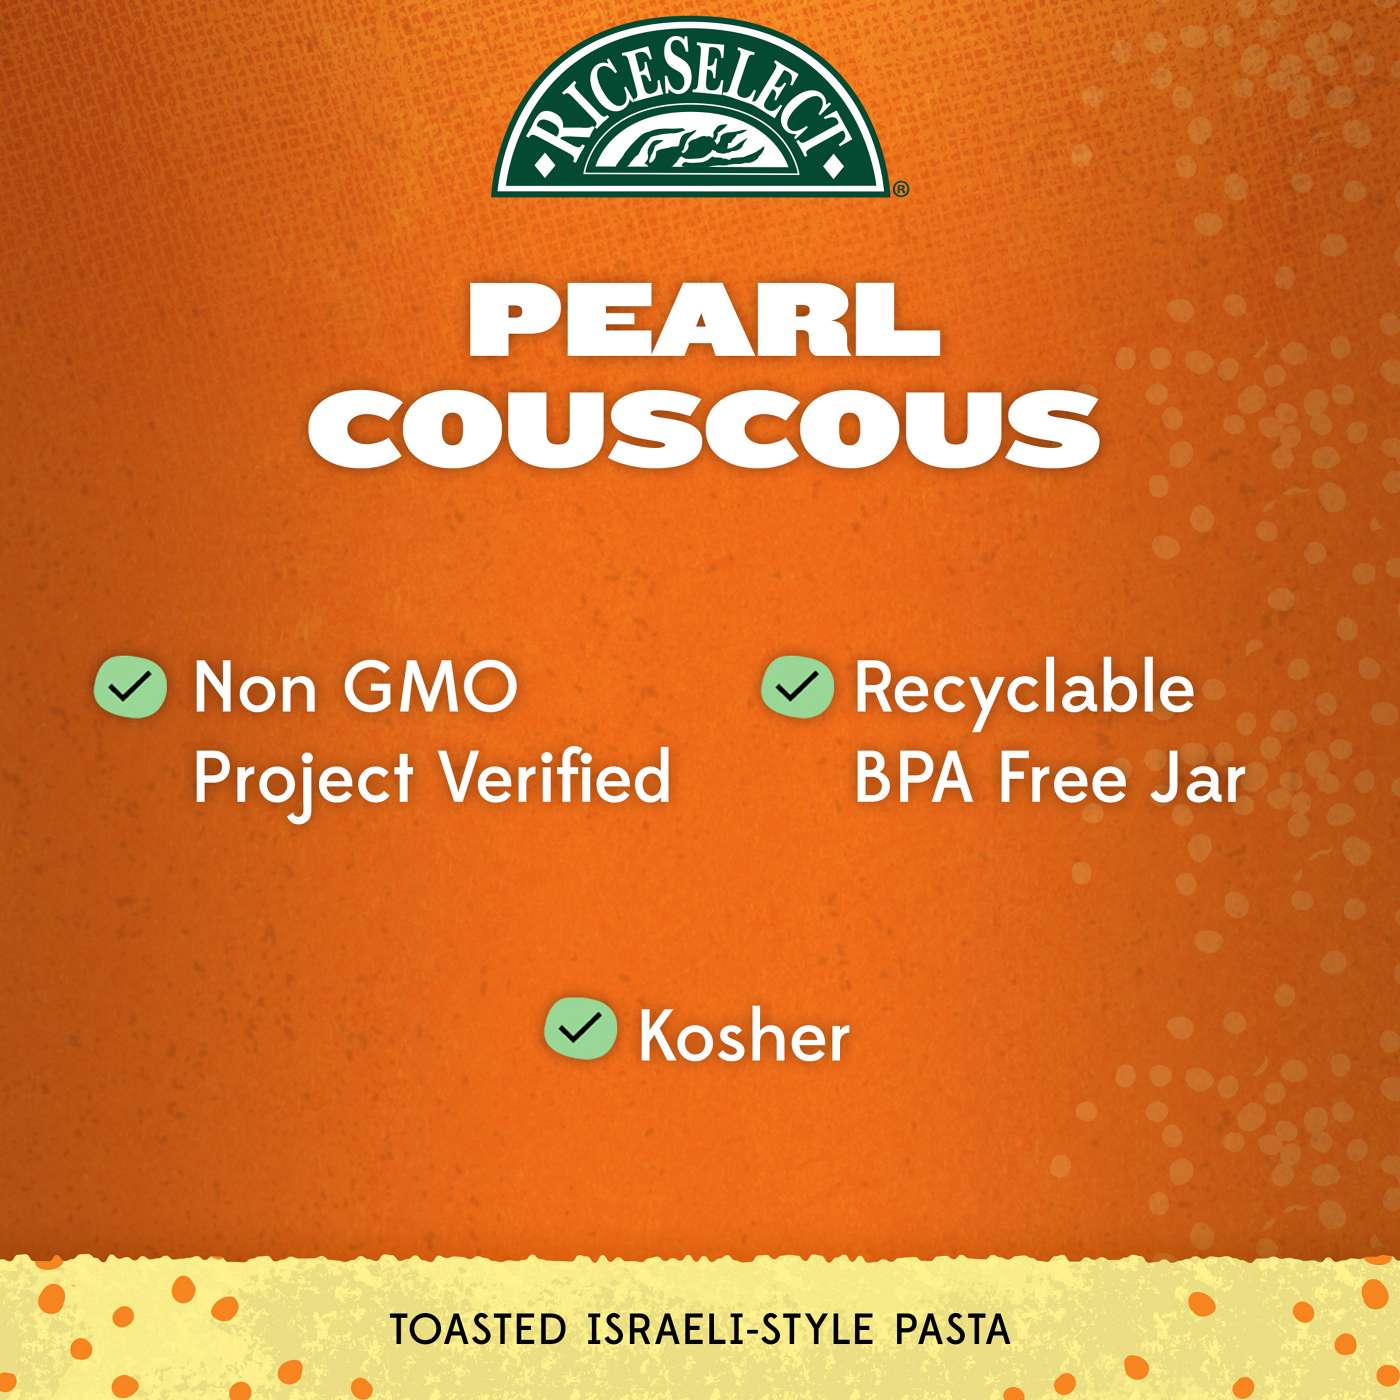 RiceSelect Original Pearl Couscous; image 4 of 6